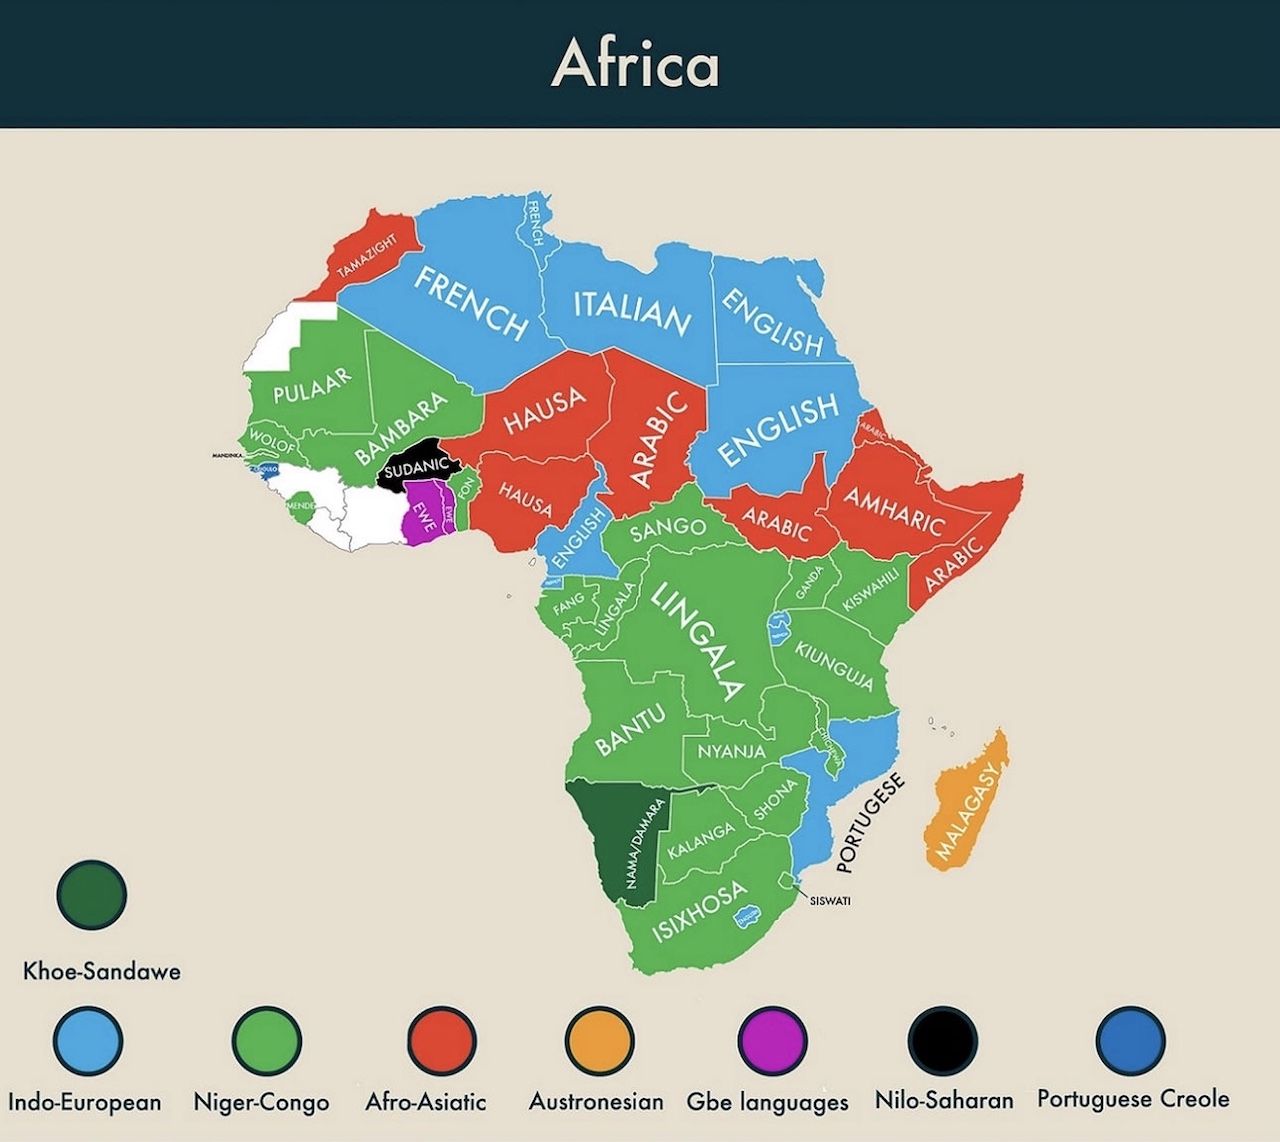 Africa most commonly spoken second language